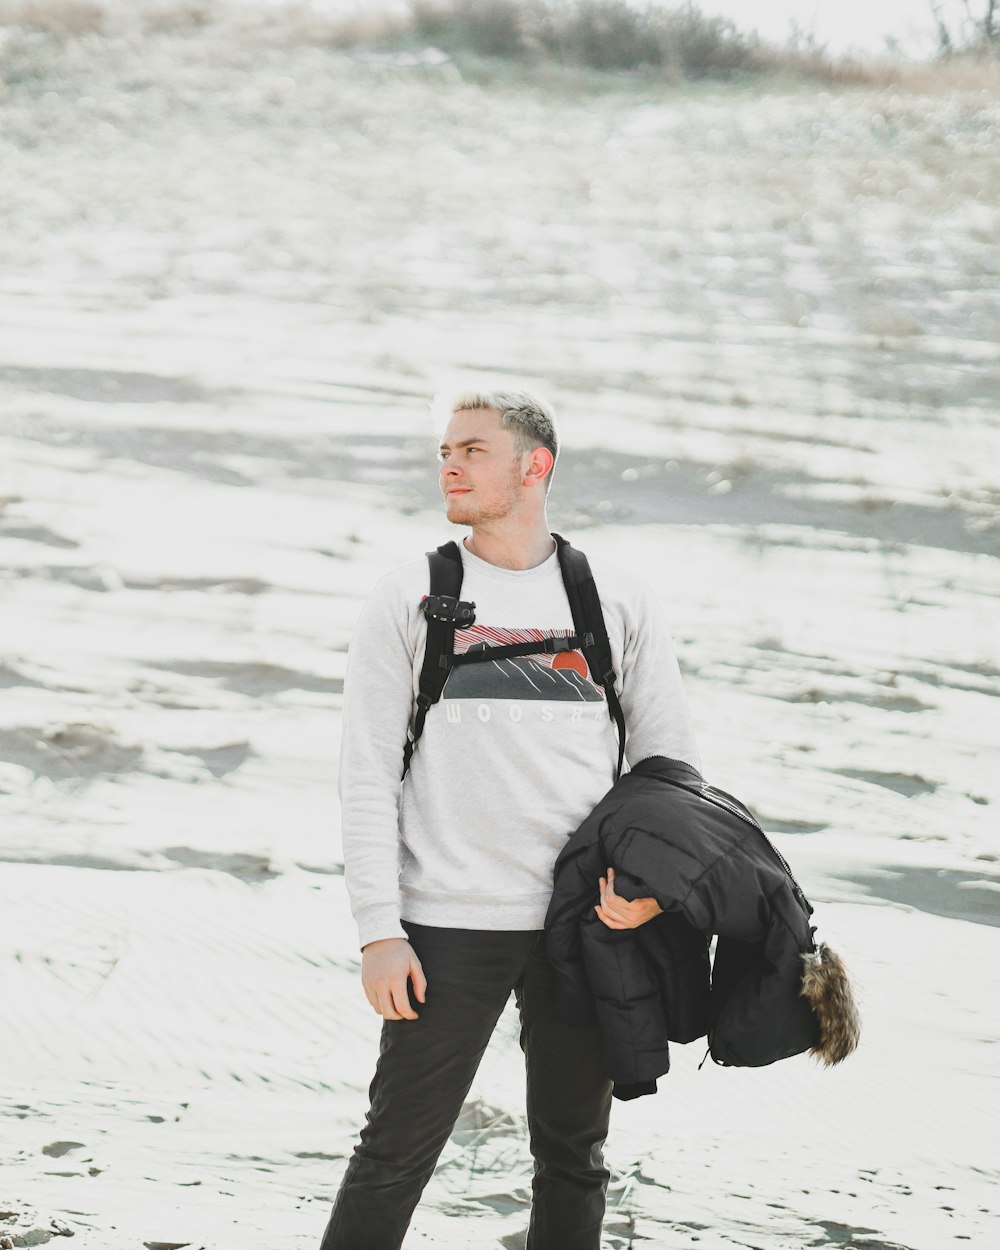 man standing near the body of water holding jacket during daytime